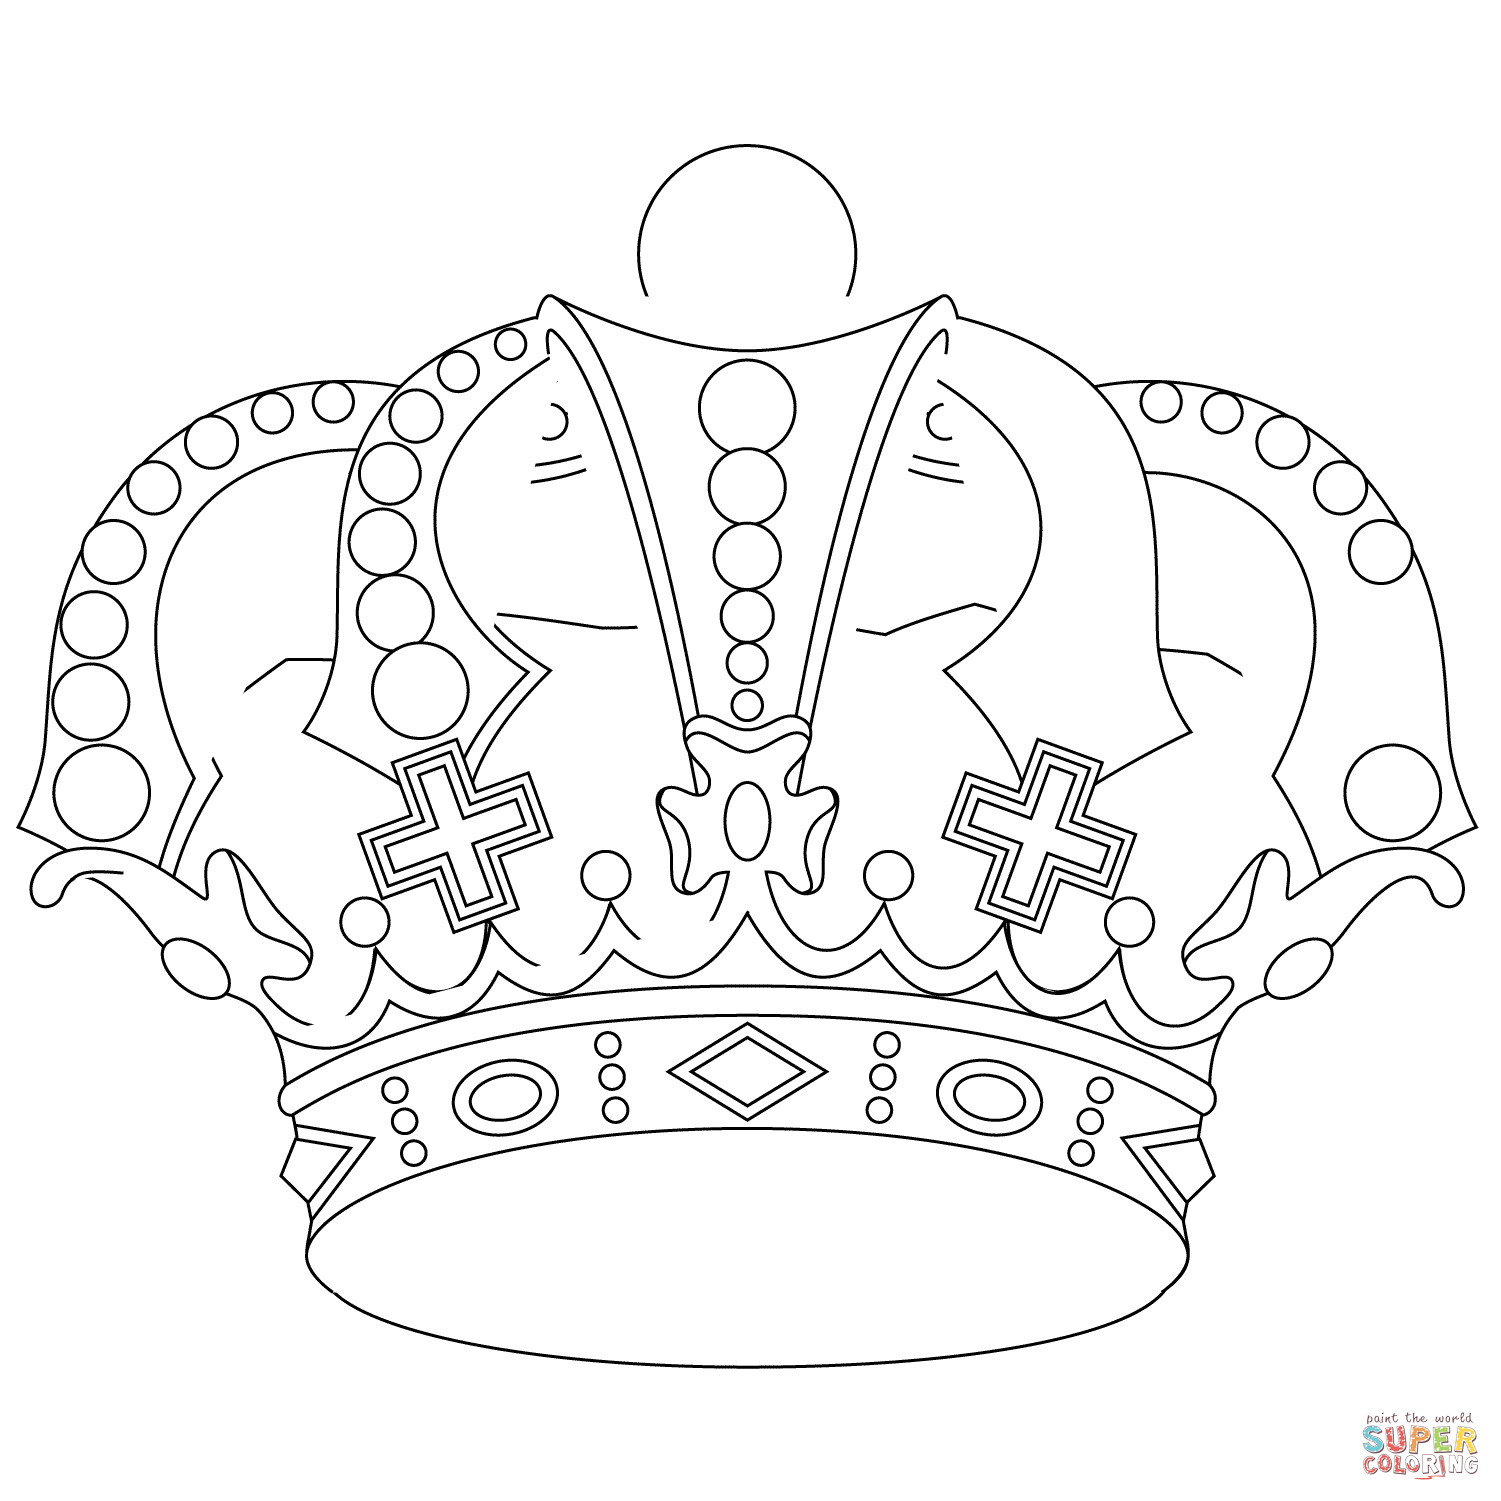 Coloring Pages : Coloring Pages Royal Crown Page Free King Magic Wand  Princess With Fors Tremendous Crown Coloring Page ~ Off-The Wall ATL